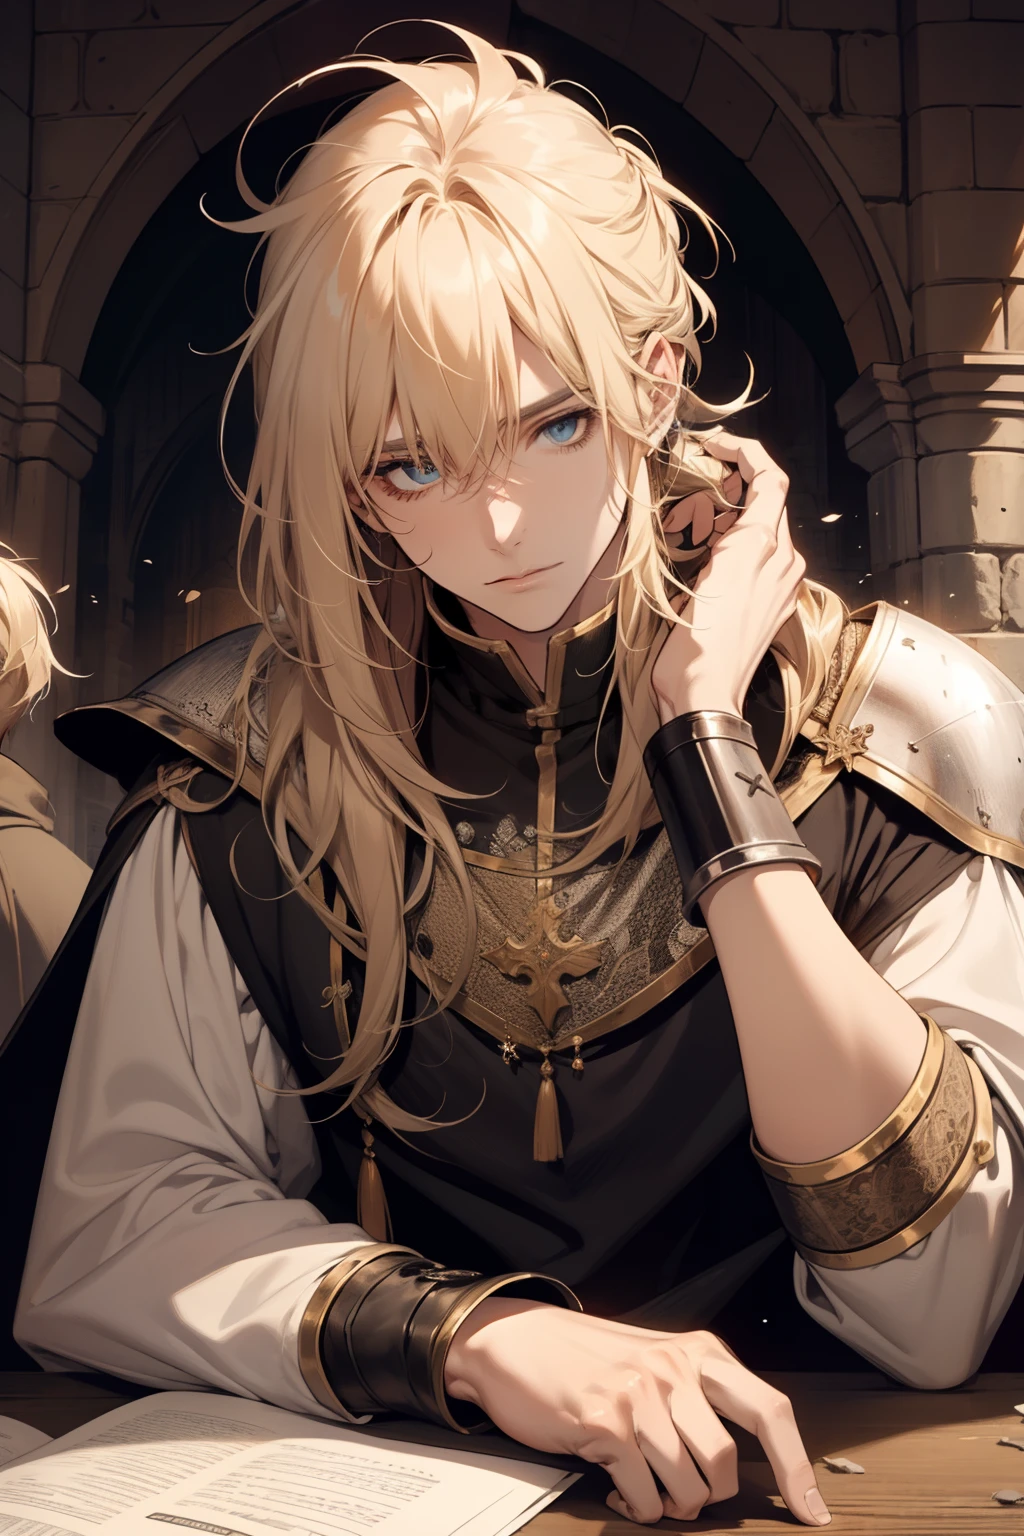 1 male, relaxed, messy blond hair with bangs in a low ponytail, white knight, beautiful, in a castle, medieval fantasy